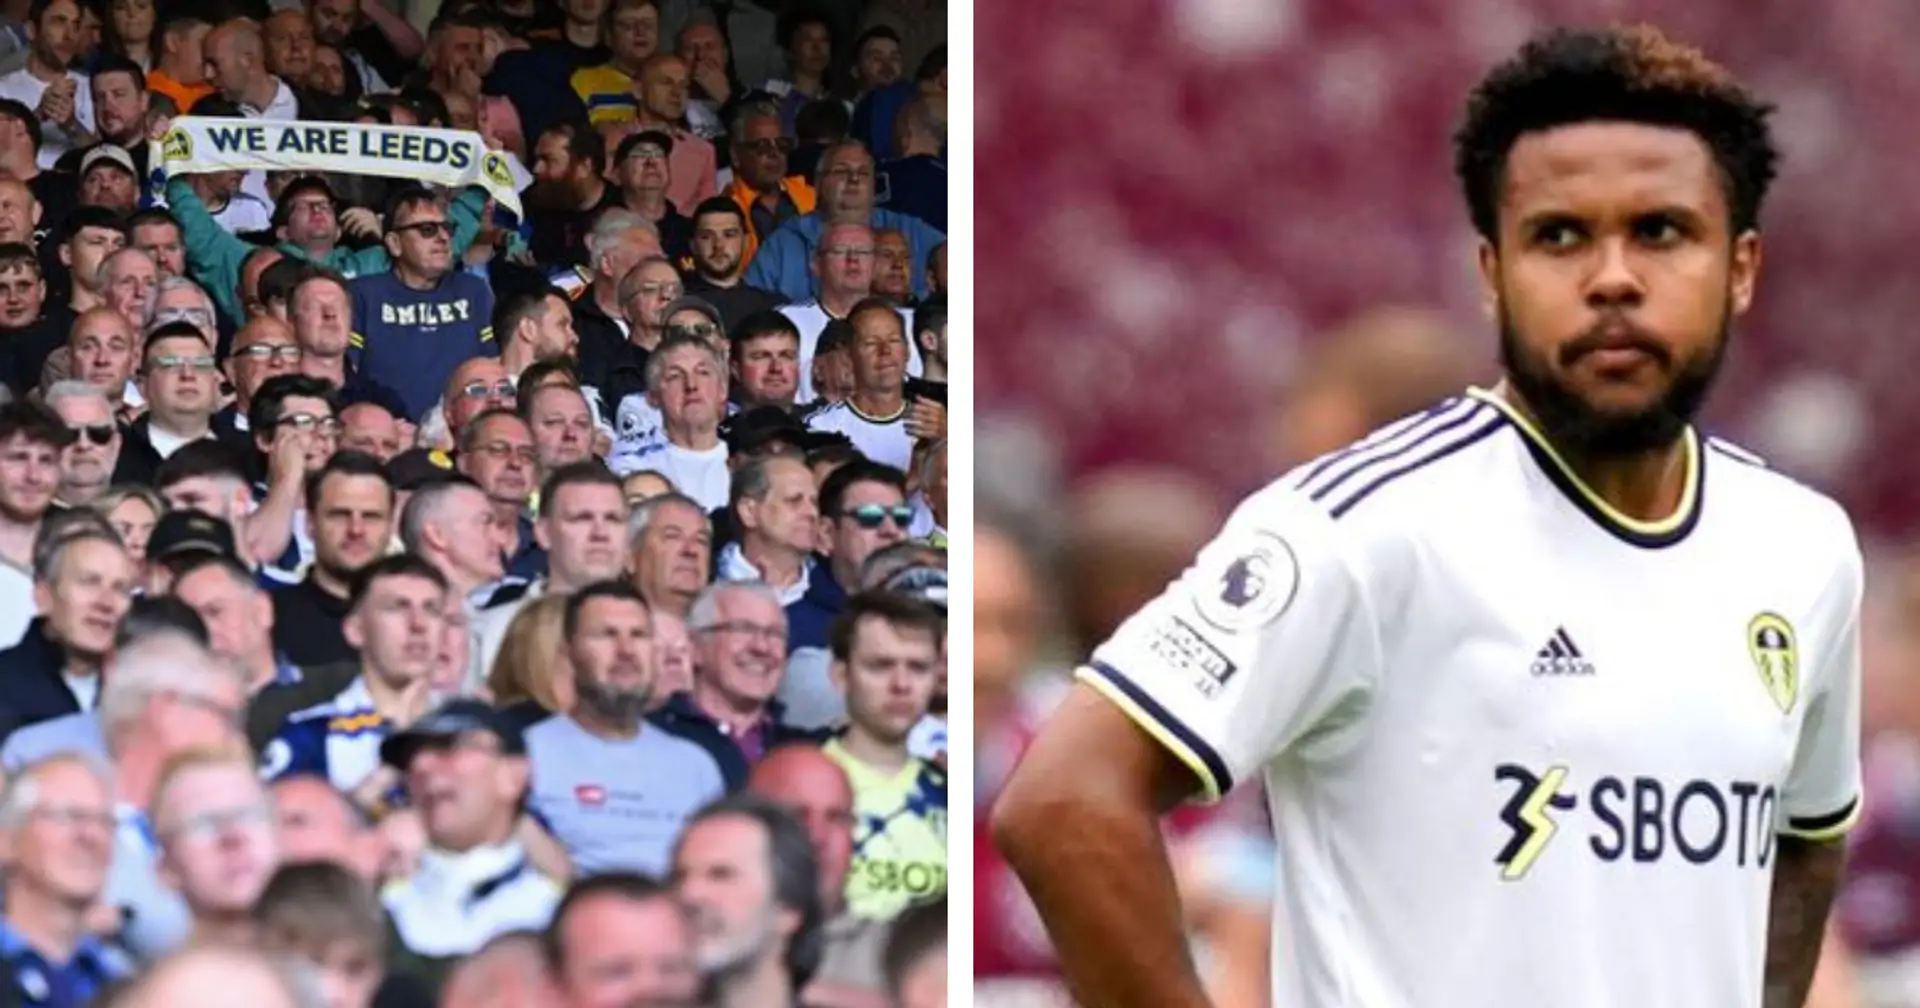 Leeds fans chant 'you fat bastard' at their own player as they go down to Championship